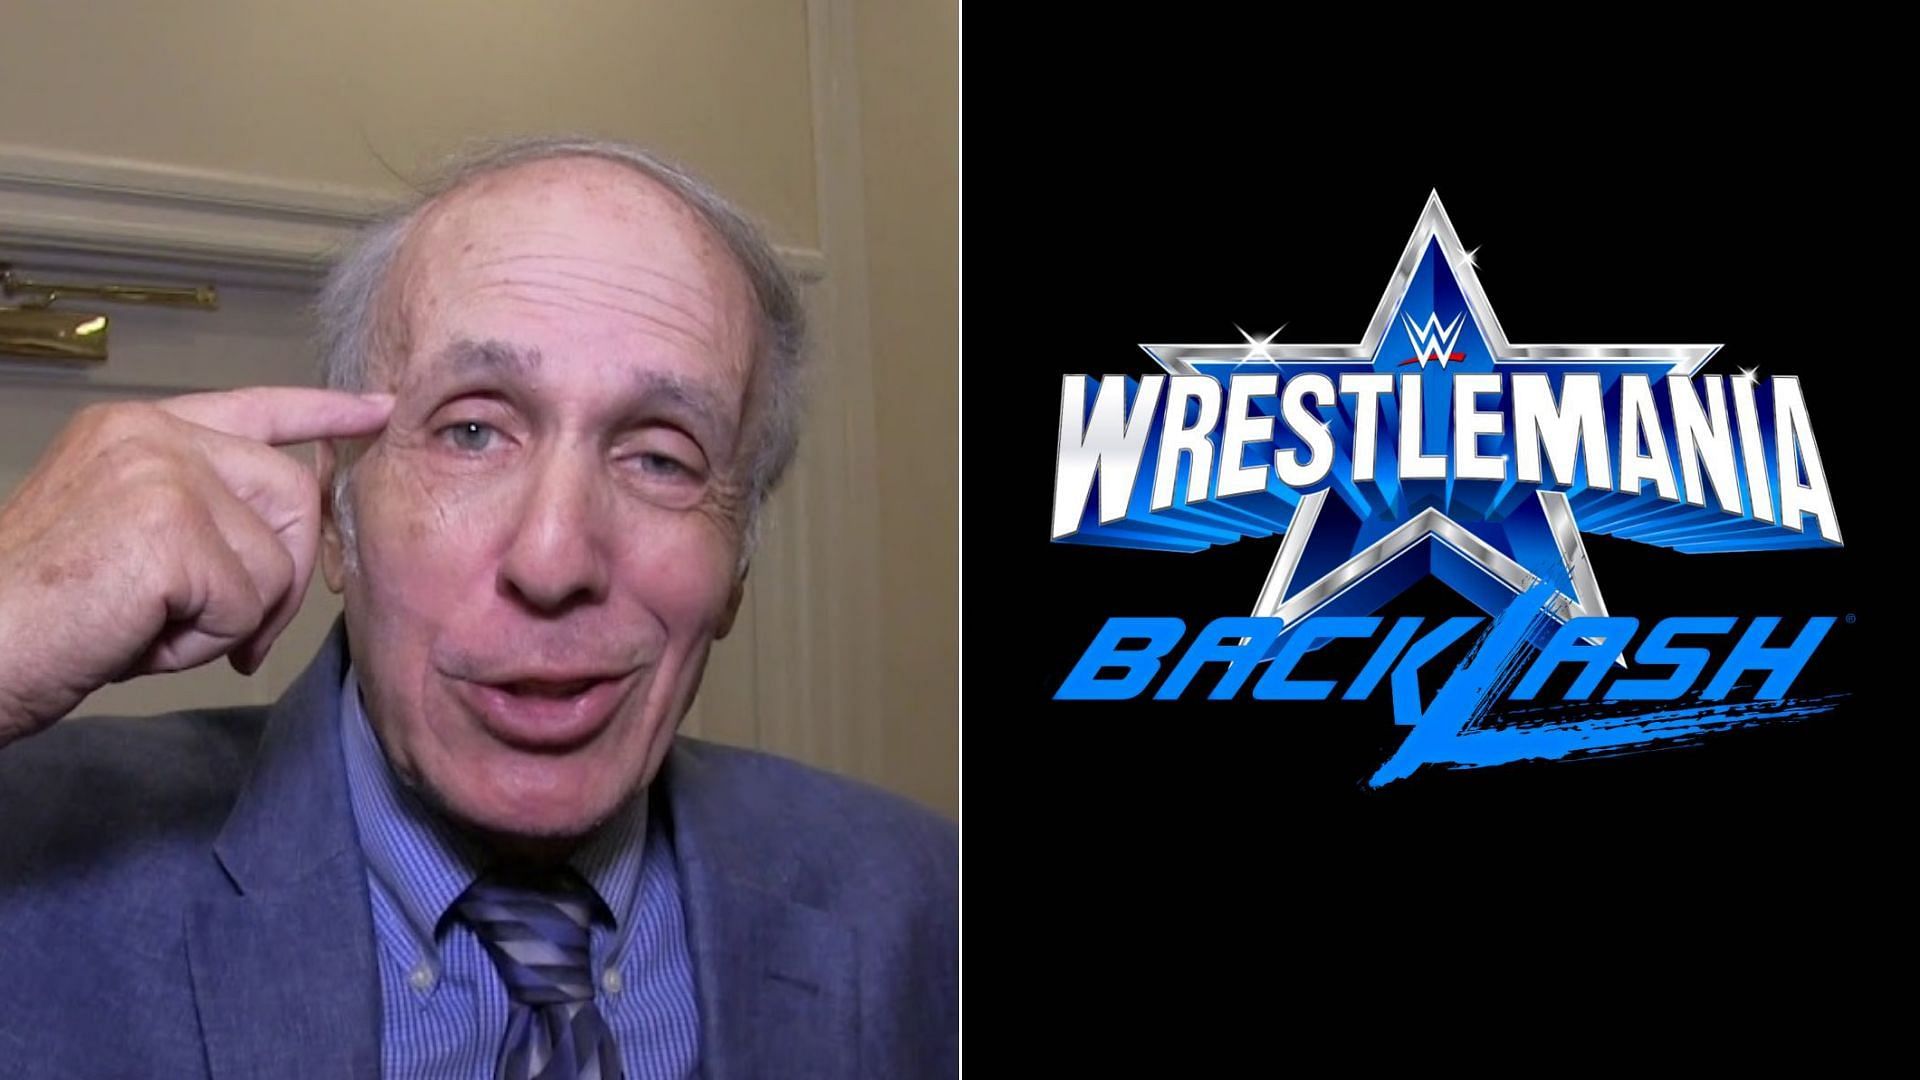 Bill Apter was surprised that a legend was missing from an ad